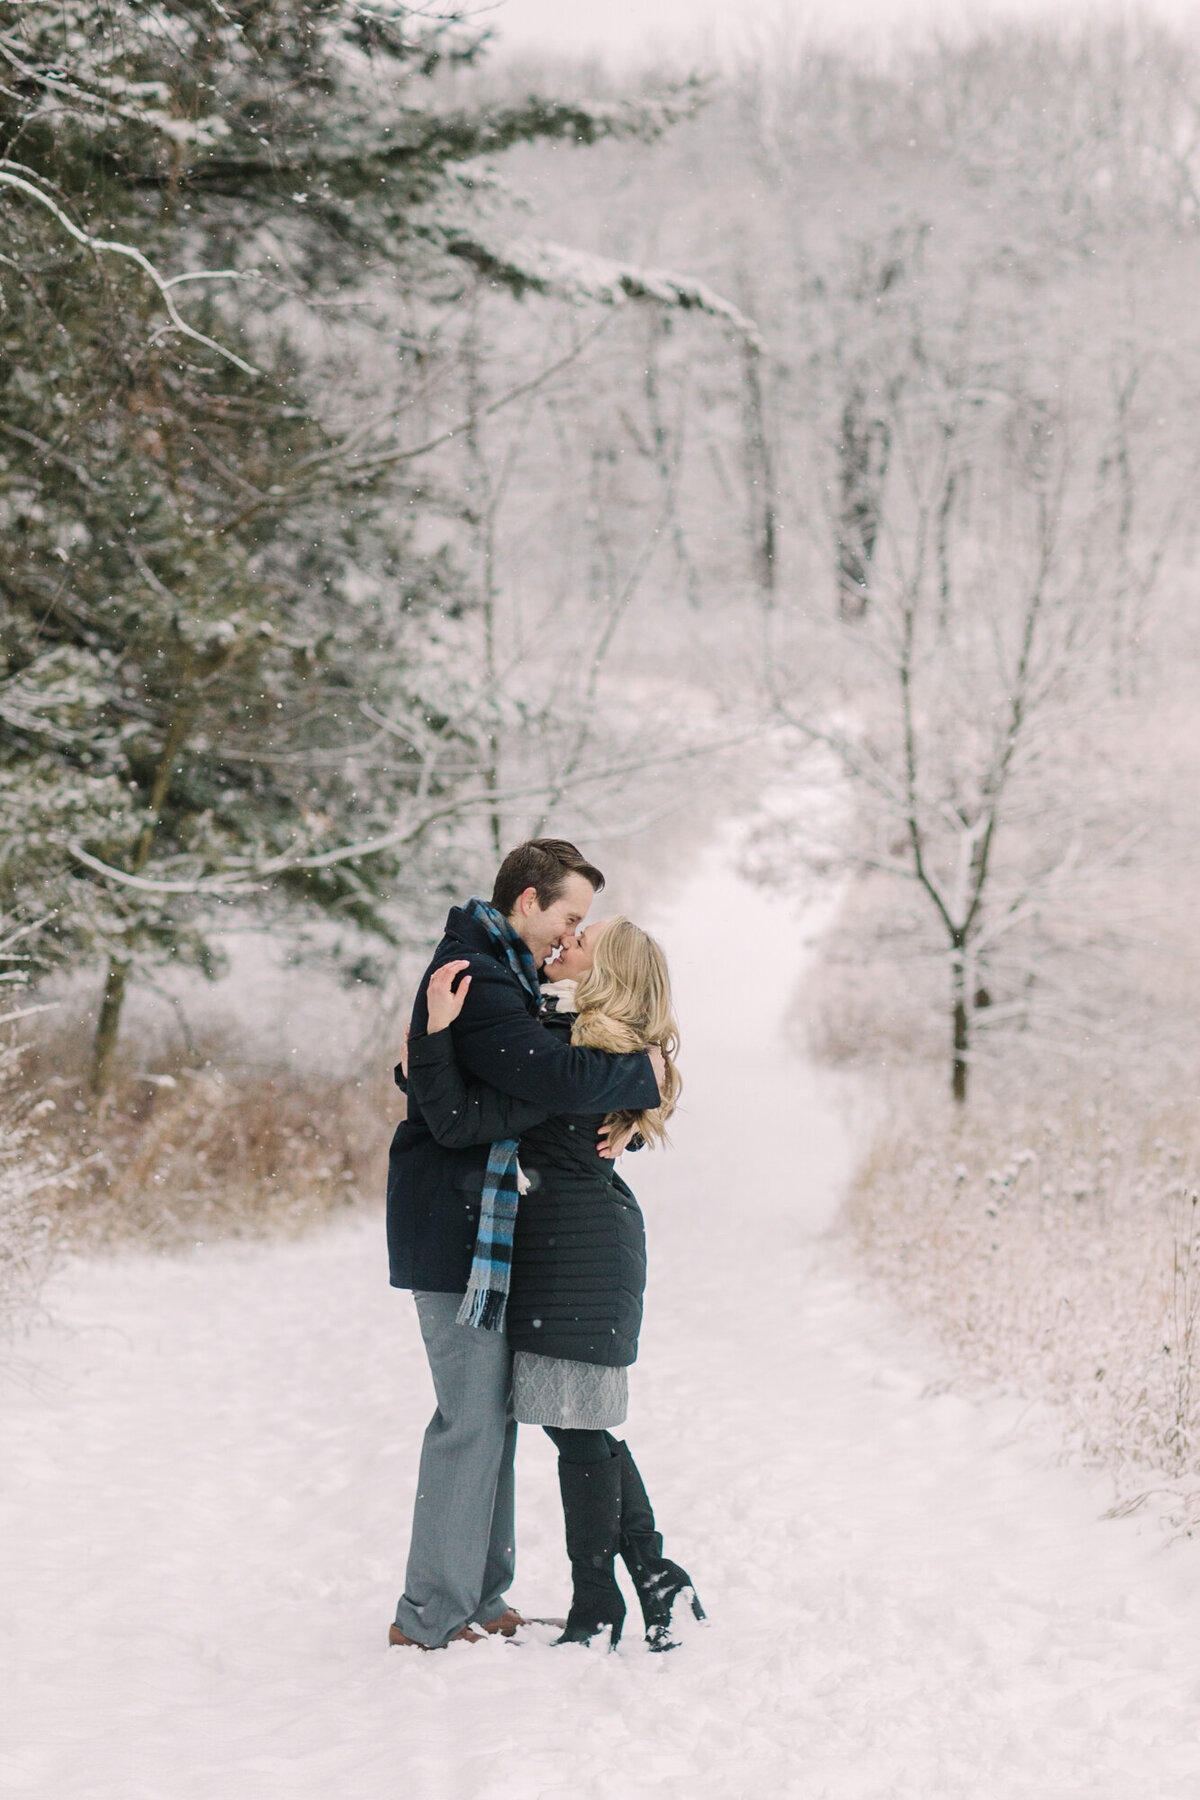 A snowy winter wonderland engagement photo in the north suburbs of Chicago